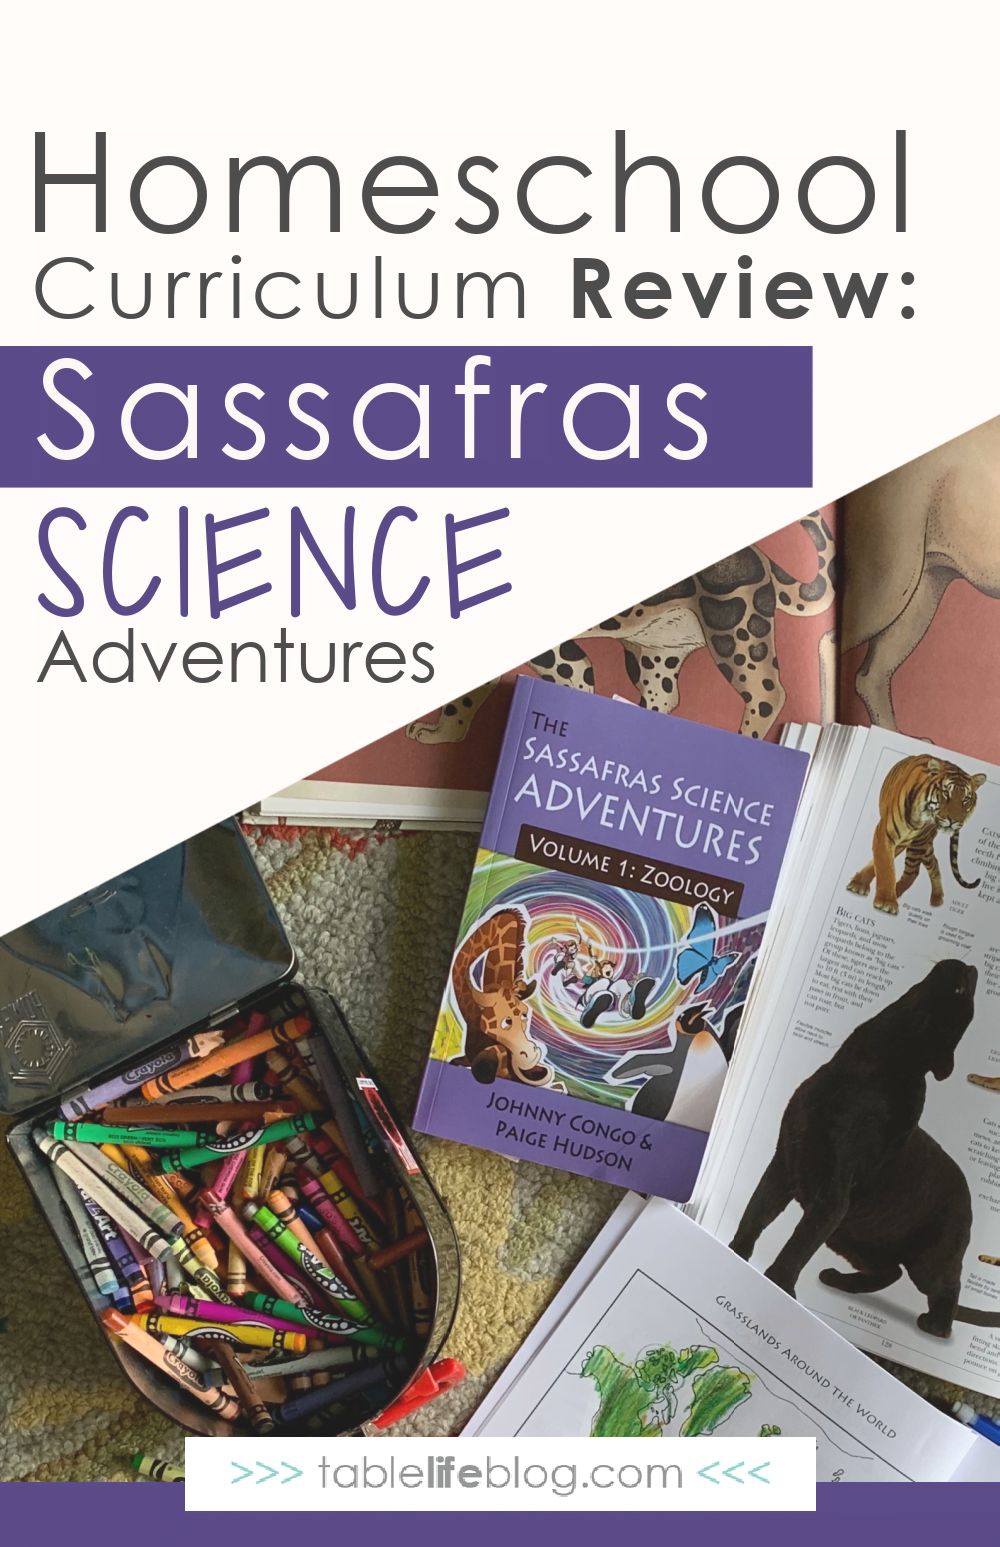 Curious about using Sassafras Science Adventures in your homeschool? Here's what you need to know about this story-based elementary science curriculum.